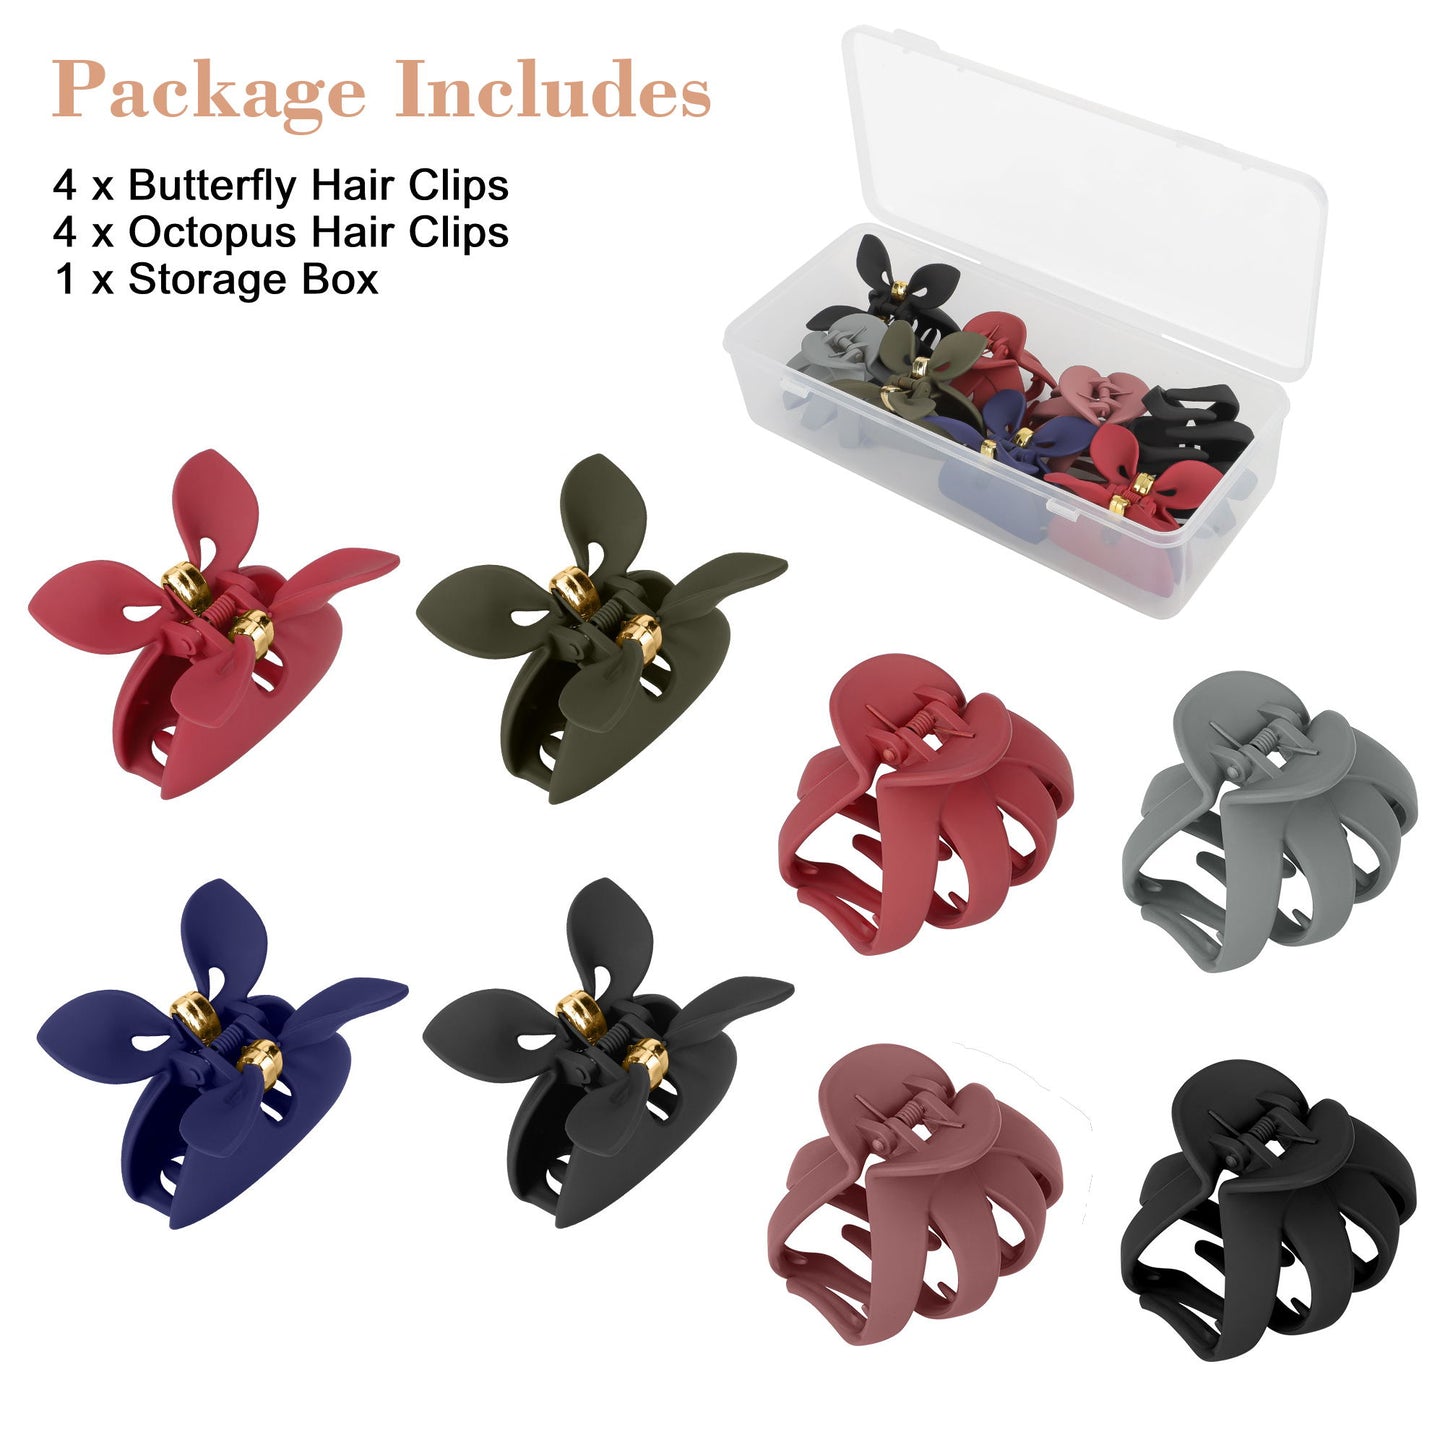 8 pcs Stylish Acrylic Hair Claw Clips - Butterfly & Octopus Designs,Versatile Hair Accessories for Styling, Portability, and Fashion Statements